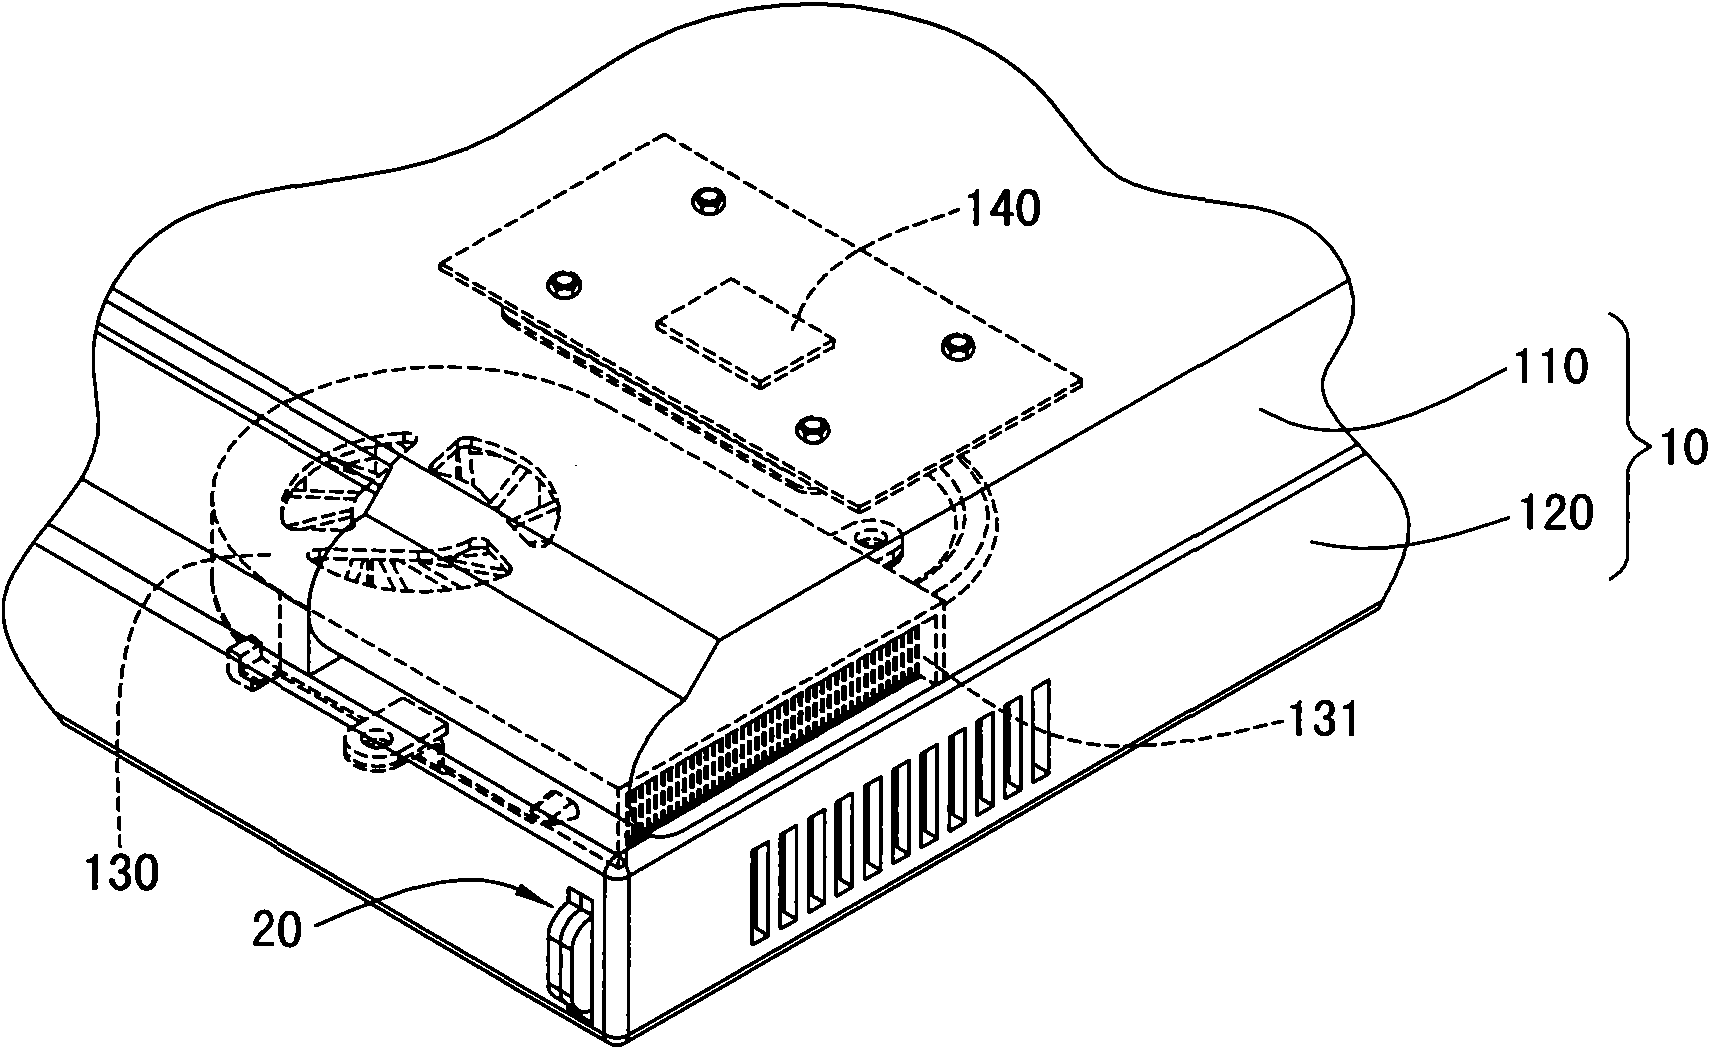 Electronic device structure capable of emitting fragrance